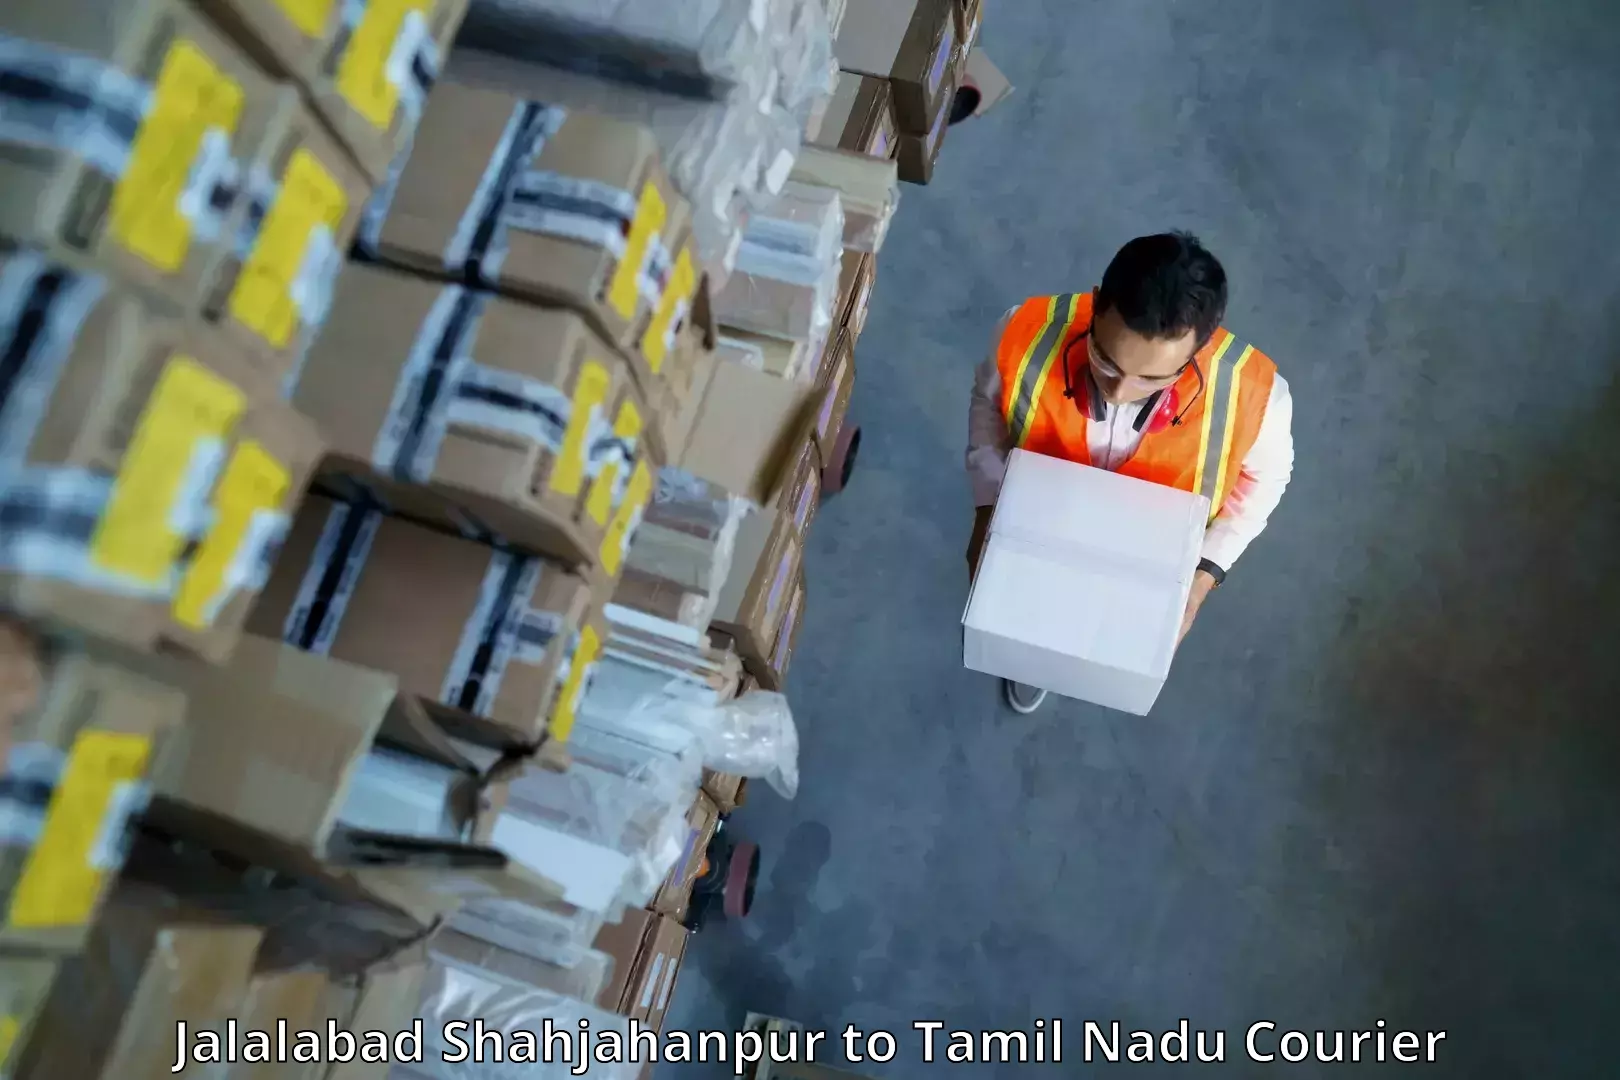 Personalized courier experiences Jalalabad Shahjahanpur to Tirupattur